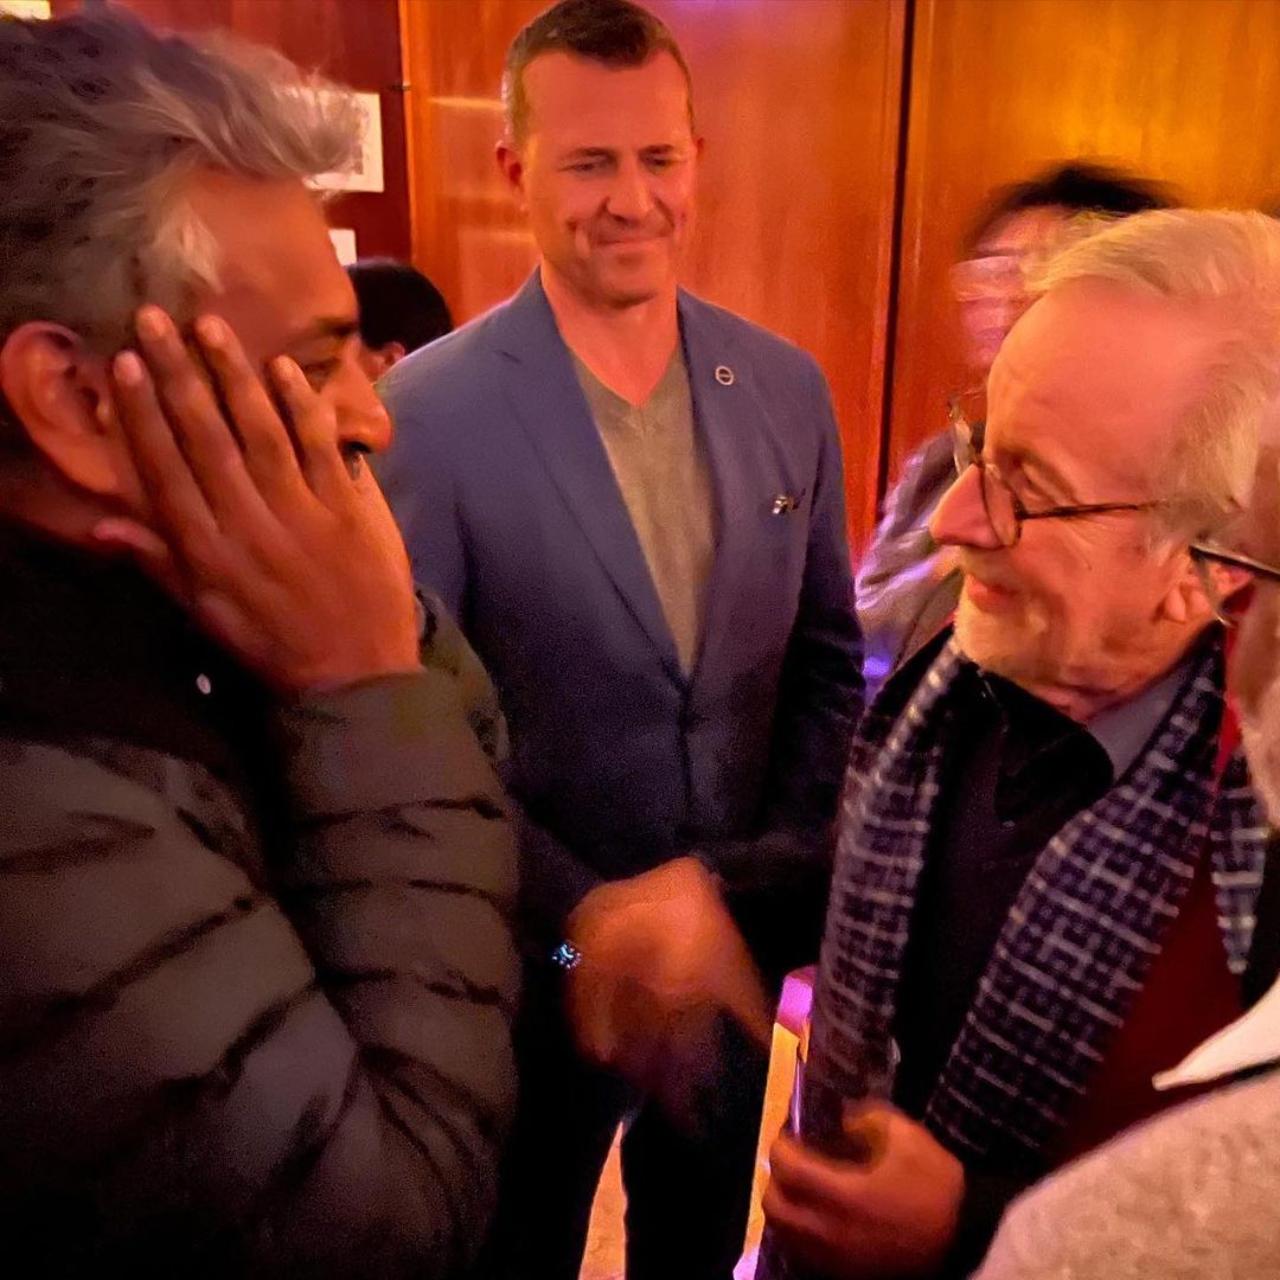 'RRR' maker SS Rajamouli had a fanboy moment when he met Steven Spielberg at what 'The Hollywood Reporter' Boris Kyt described as an A-list star-stuffed celebration thrown by Universal at West Hollywood's famous Sunset Tower Hotel.Kyt of 'The Hollywood Reporter' tweeted about the meeting with comment: 